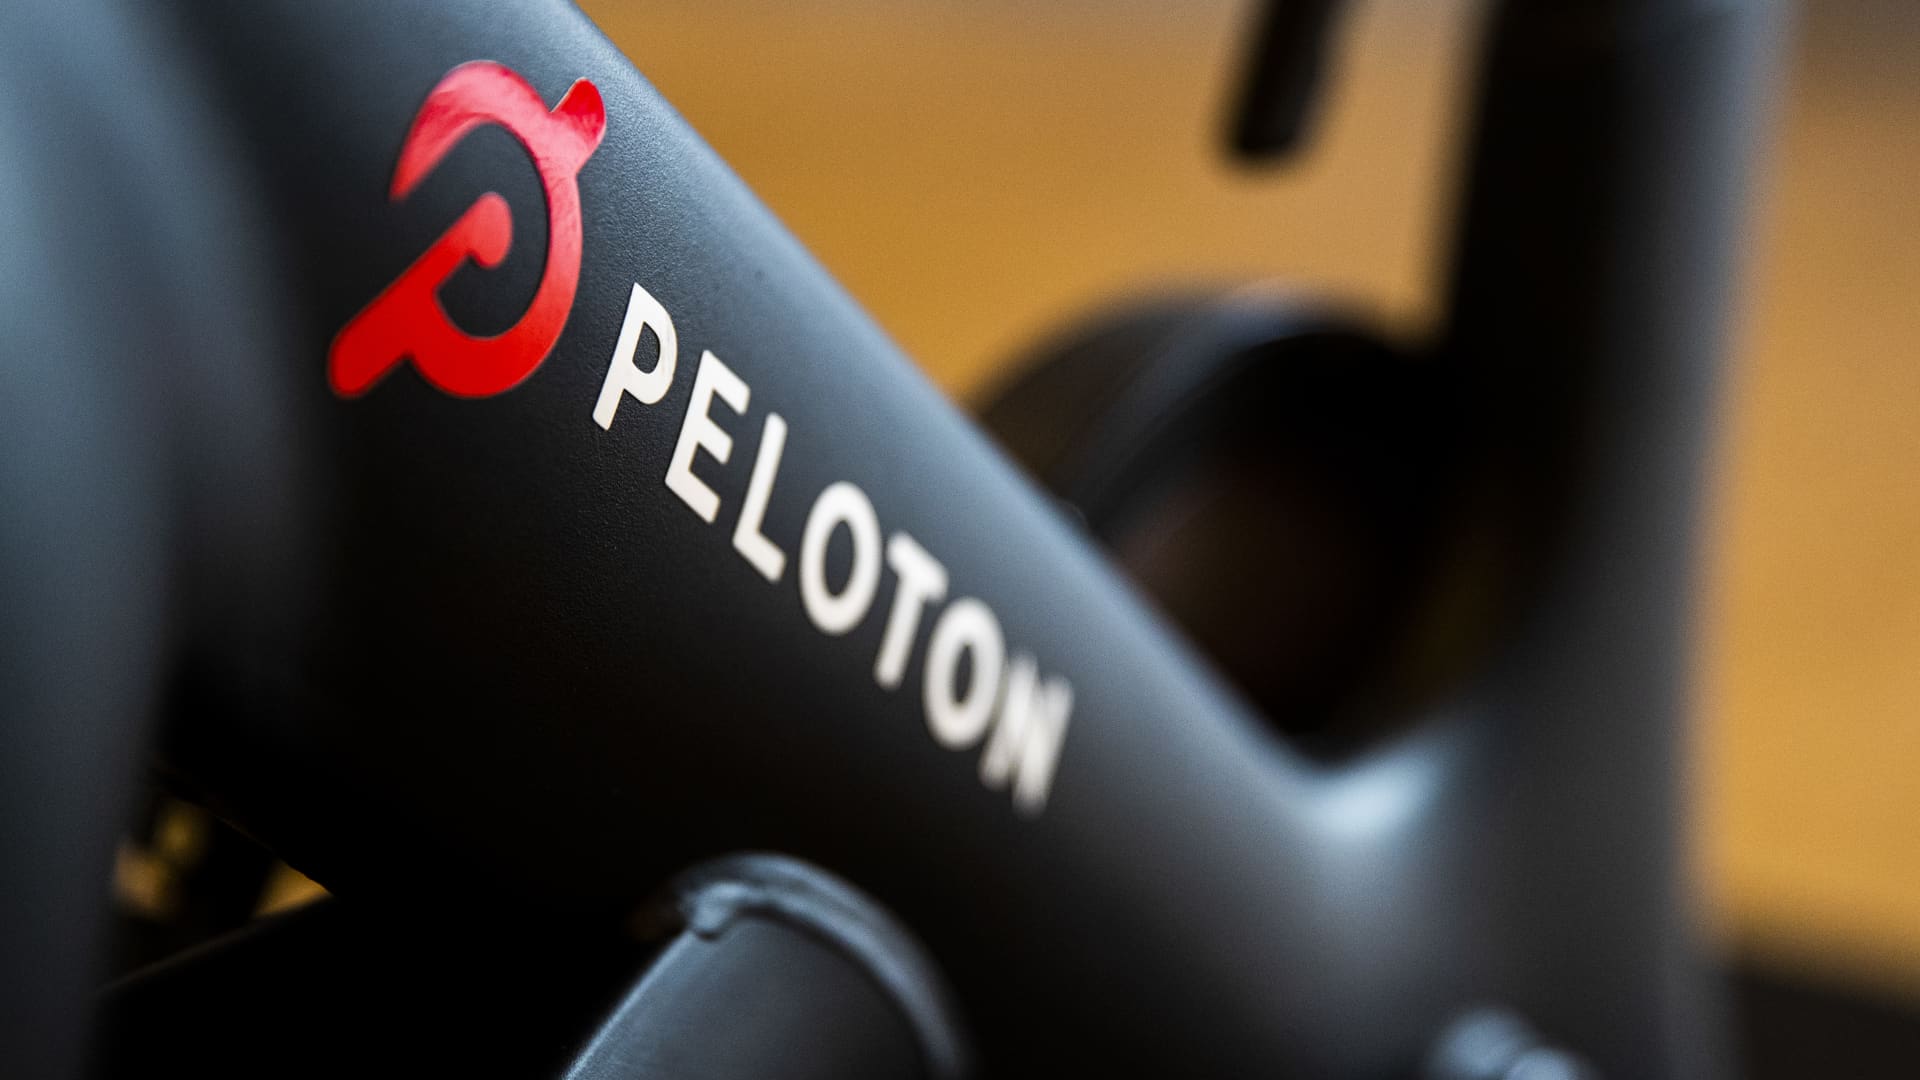 Peloton will sell Bikes, Treads at Dick's Sporting Goods in its first brick-and-mortar partnership - CNBC